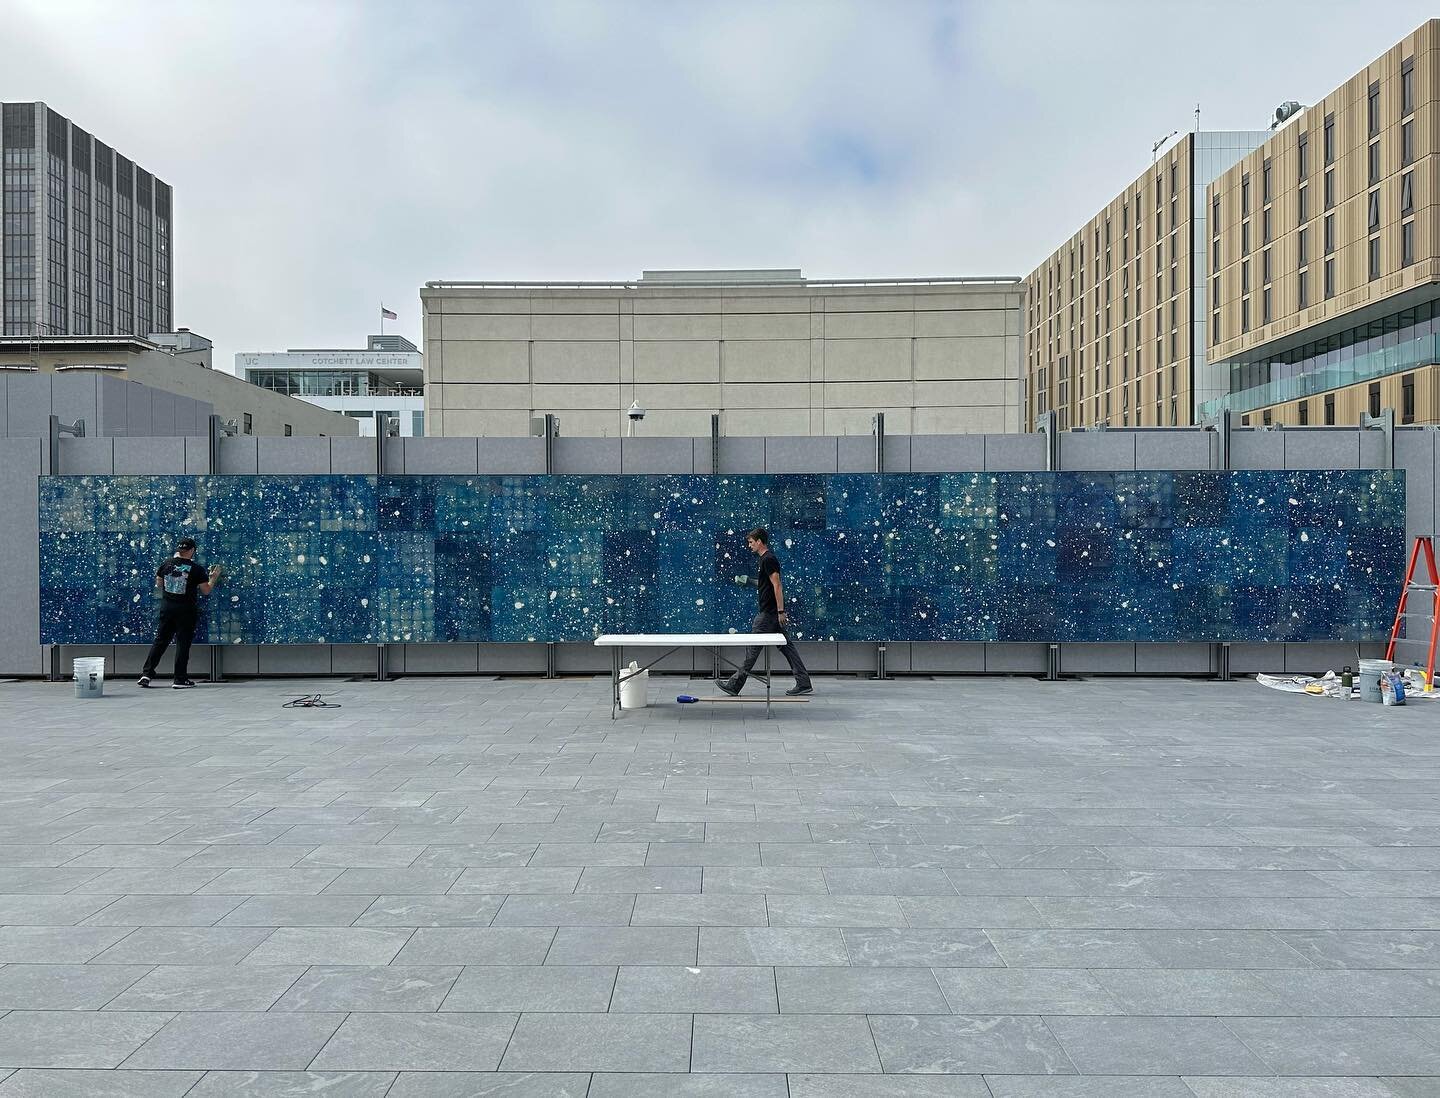 Opening today. Luminous Ground at the new East West Bank Art Terrace @asianartmuseum 
.
Deep gratitude to the many hands and individuals that helped birth this work. My head ceramicist Ritsuko Miyazaki and team Hannah Desch and Racquelle Justo, my gl